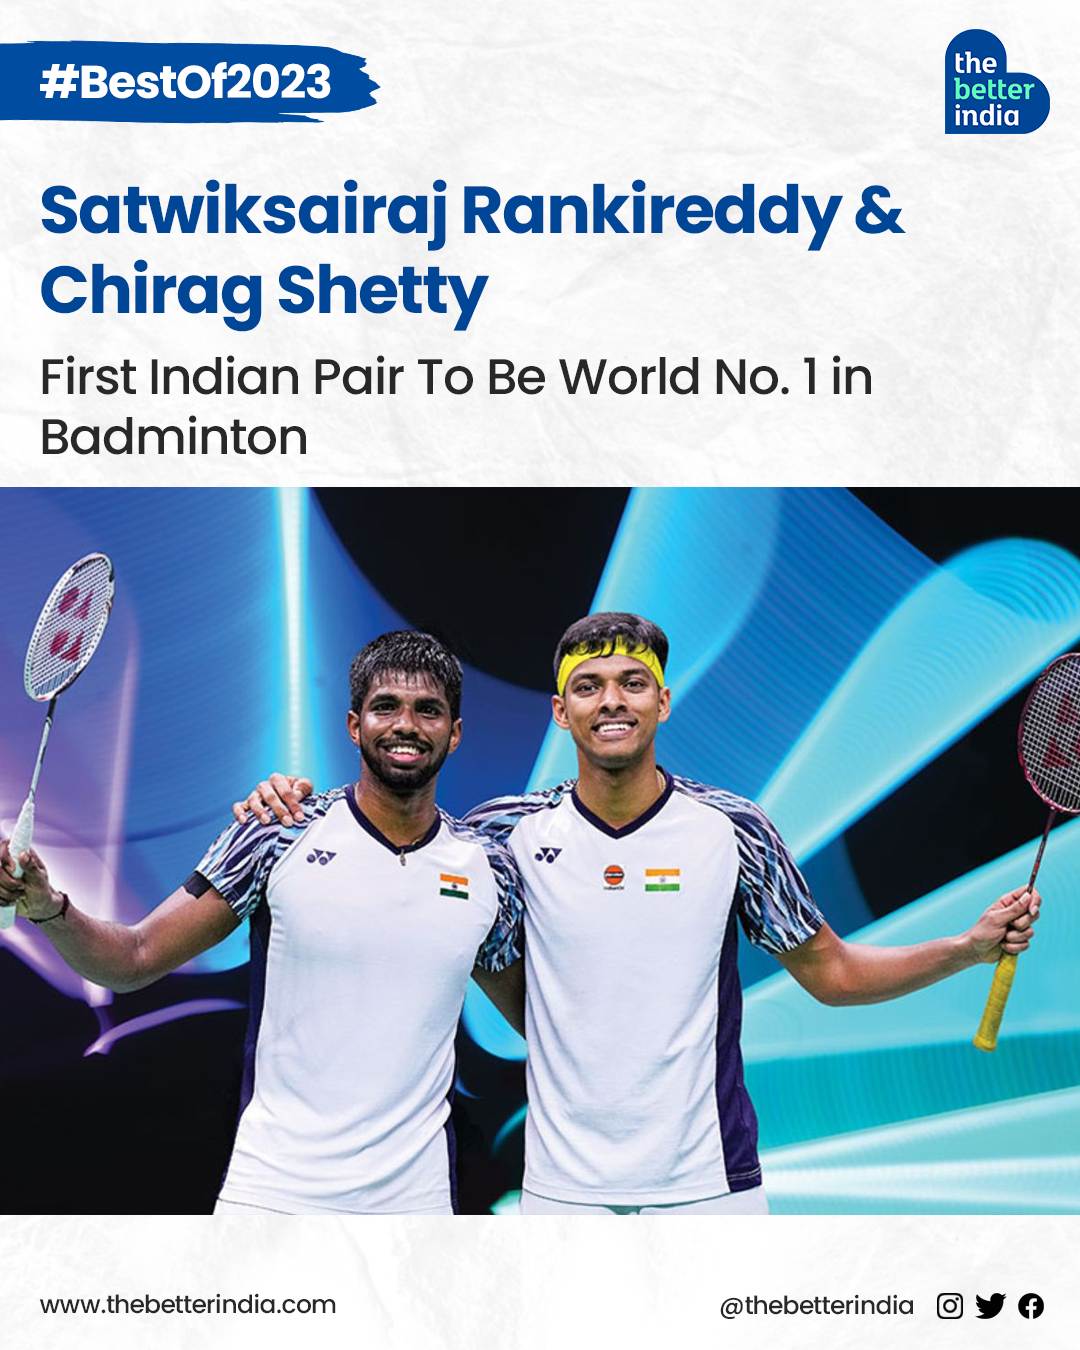 The duo became the World No 1 men's doubles pair to win in badminton at the Asian Games